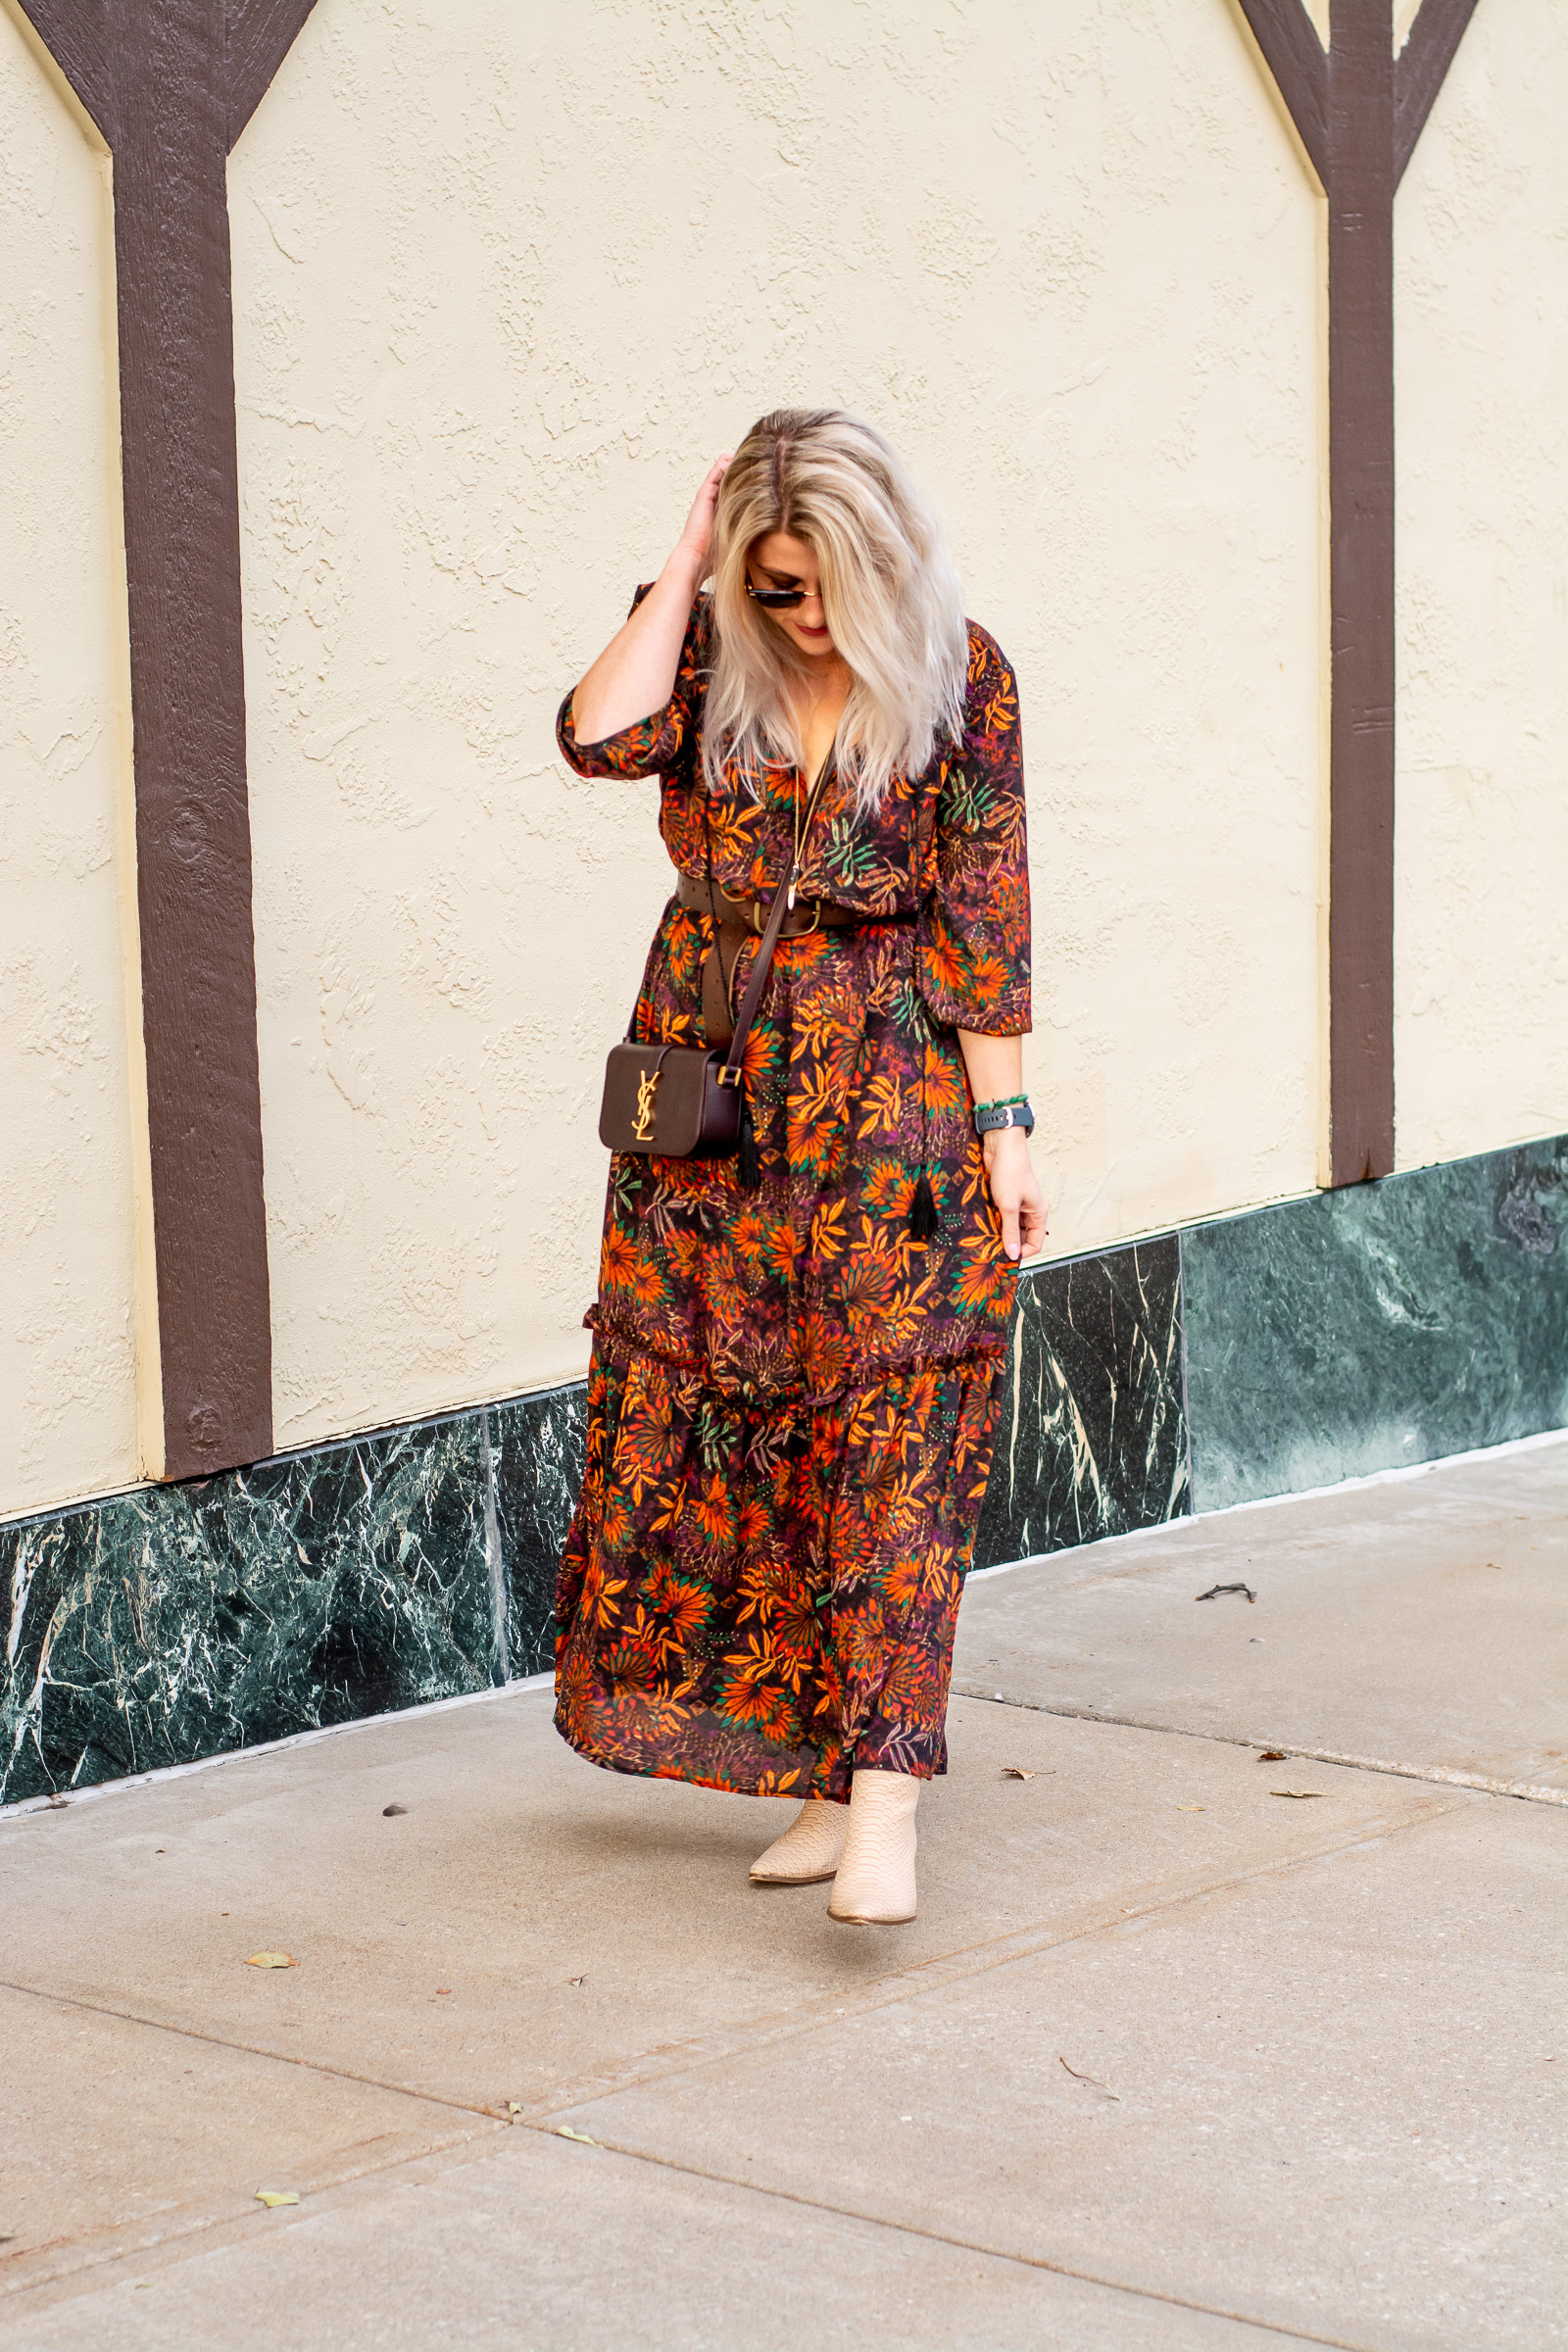 Fall Boho Dress and Booties. | LSR